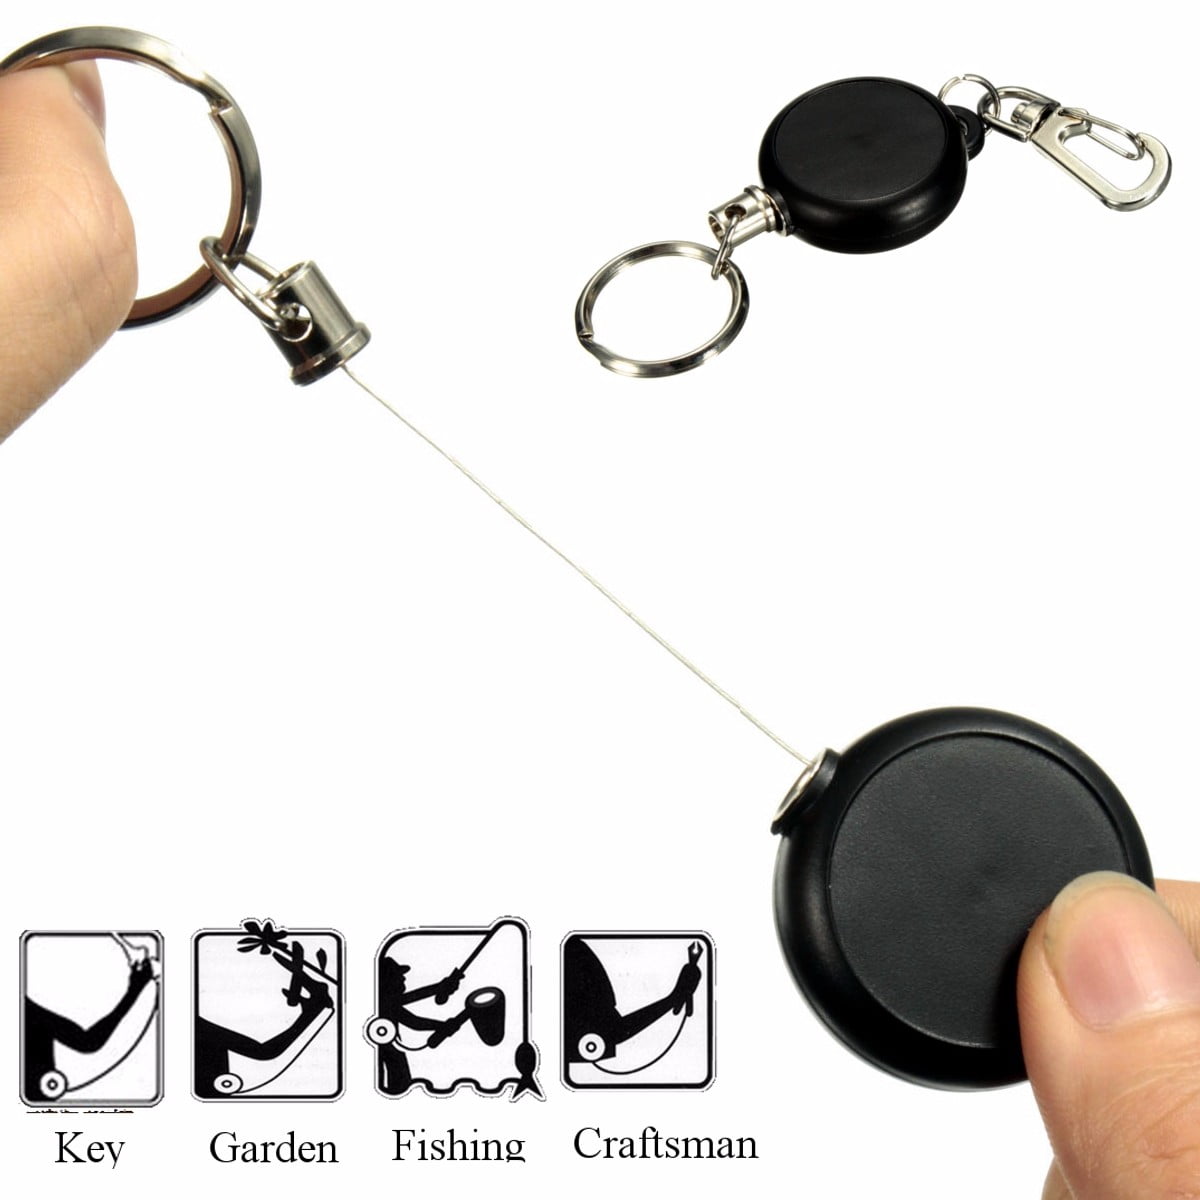 XGao Locking Retractable Keychain Heavy Duty Key Ring Self Retracting Alloy Badge Holder Reel with Belt Clip Key Chain Holder Steel Wire Cord 